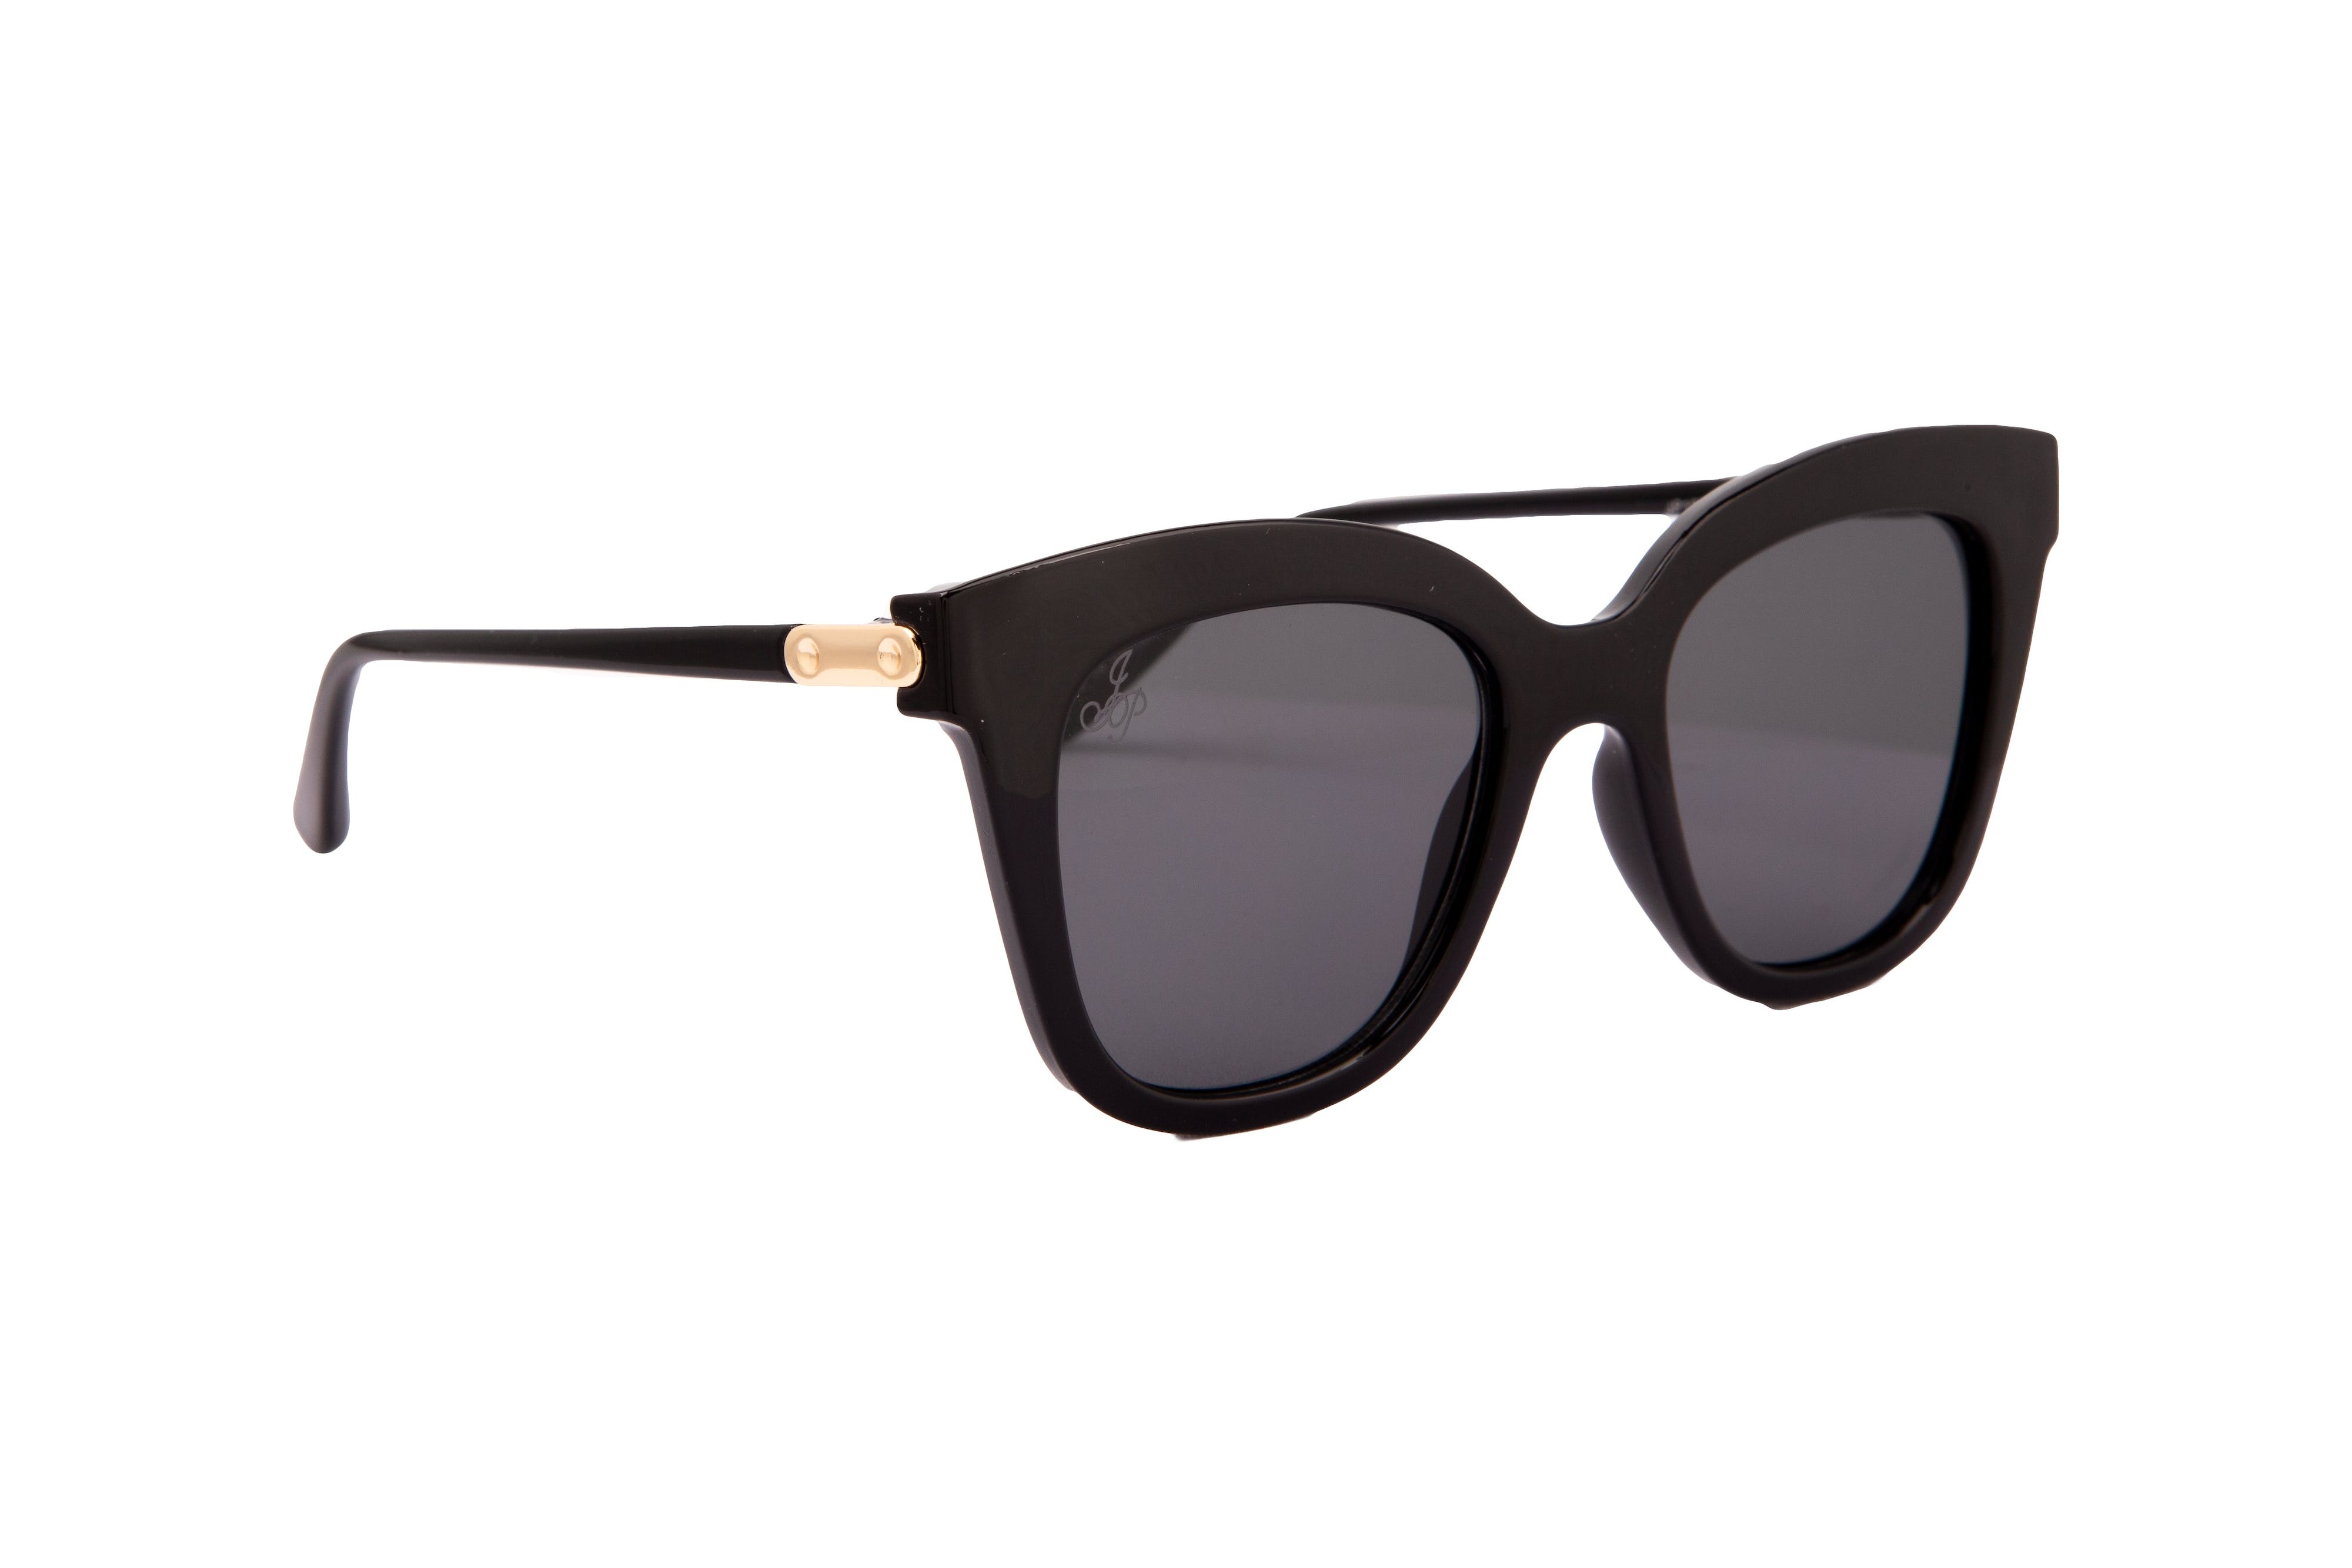 BLACK CAT EYE STYLE WITH GOLD DETAILING SUNGLASSES